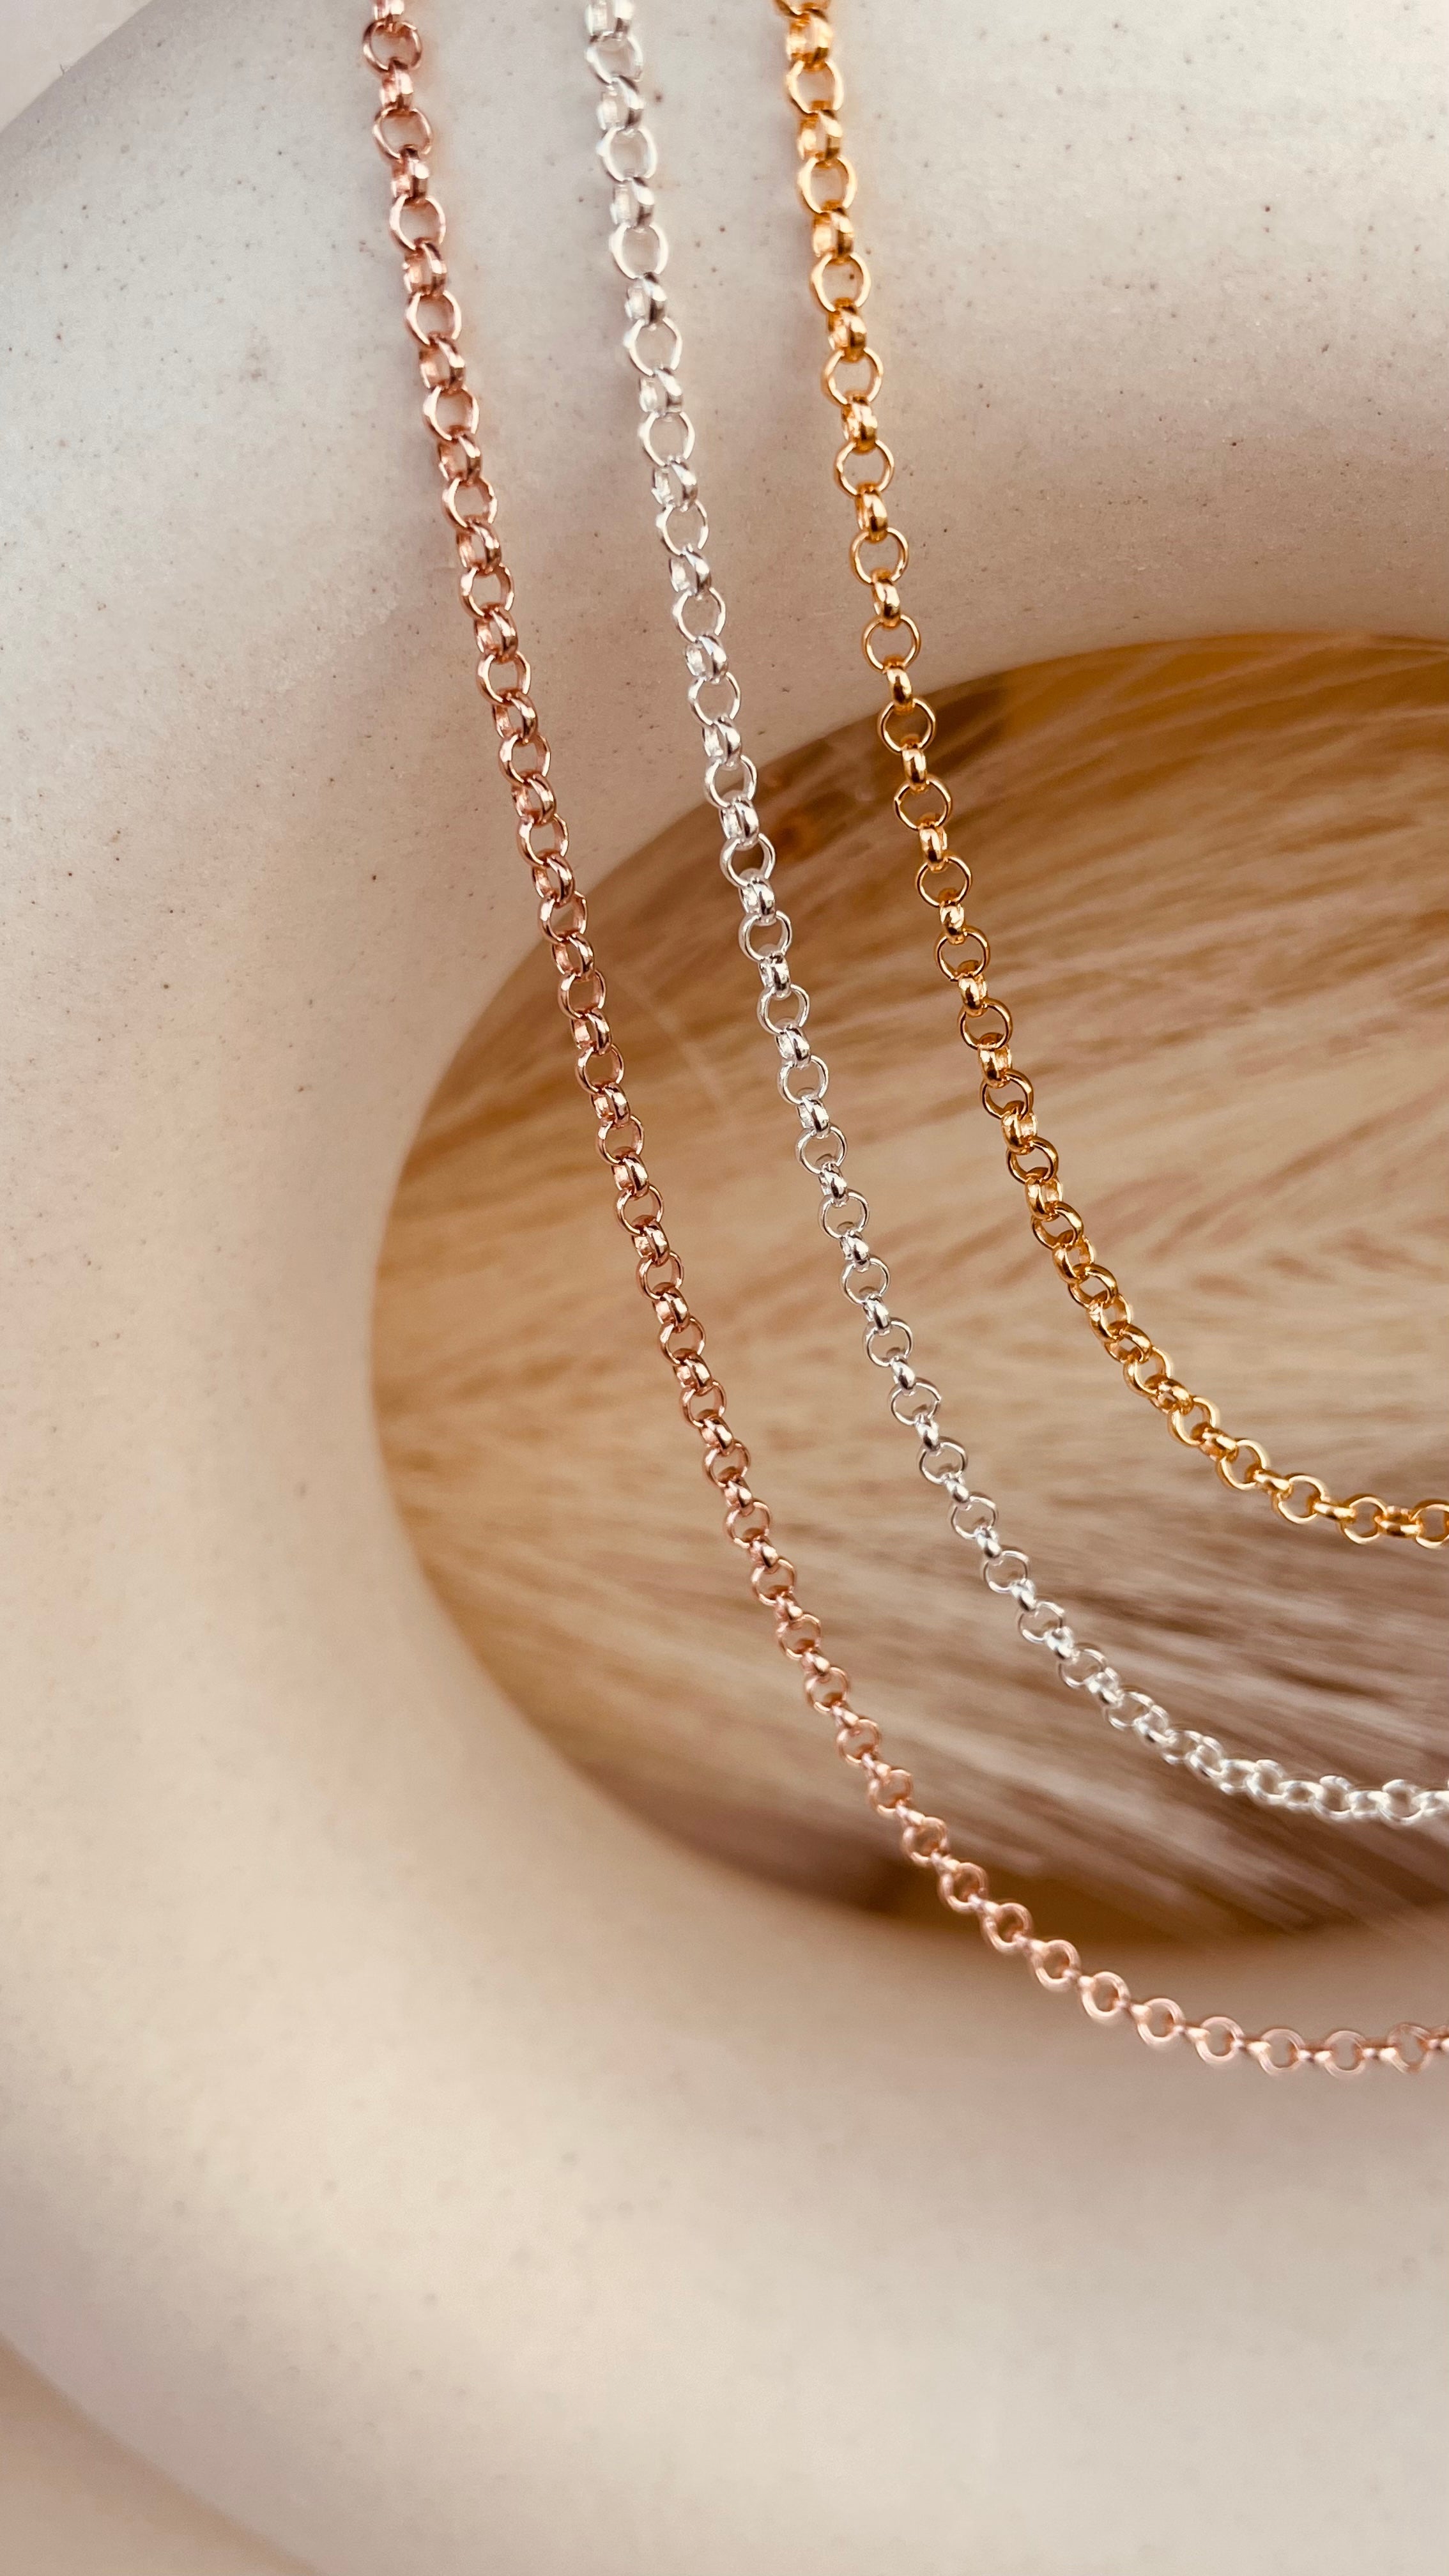 Rose Gold Rolo Chain Necklace - Octonov 